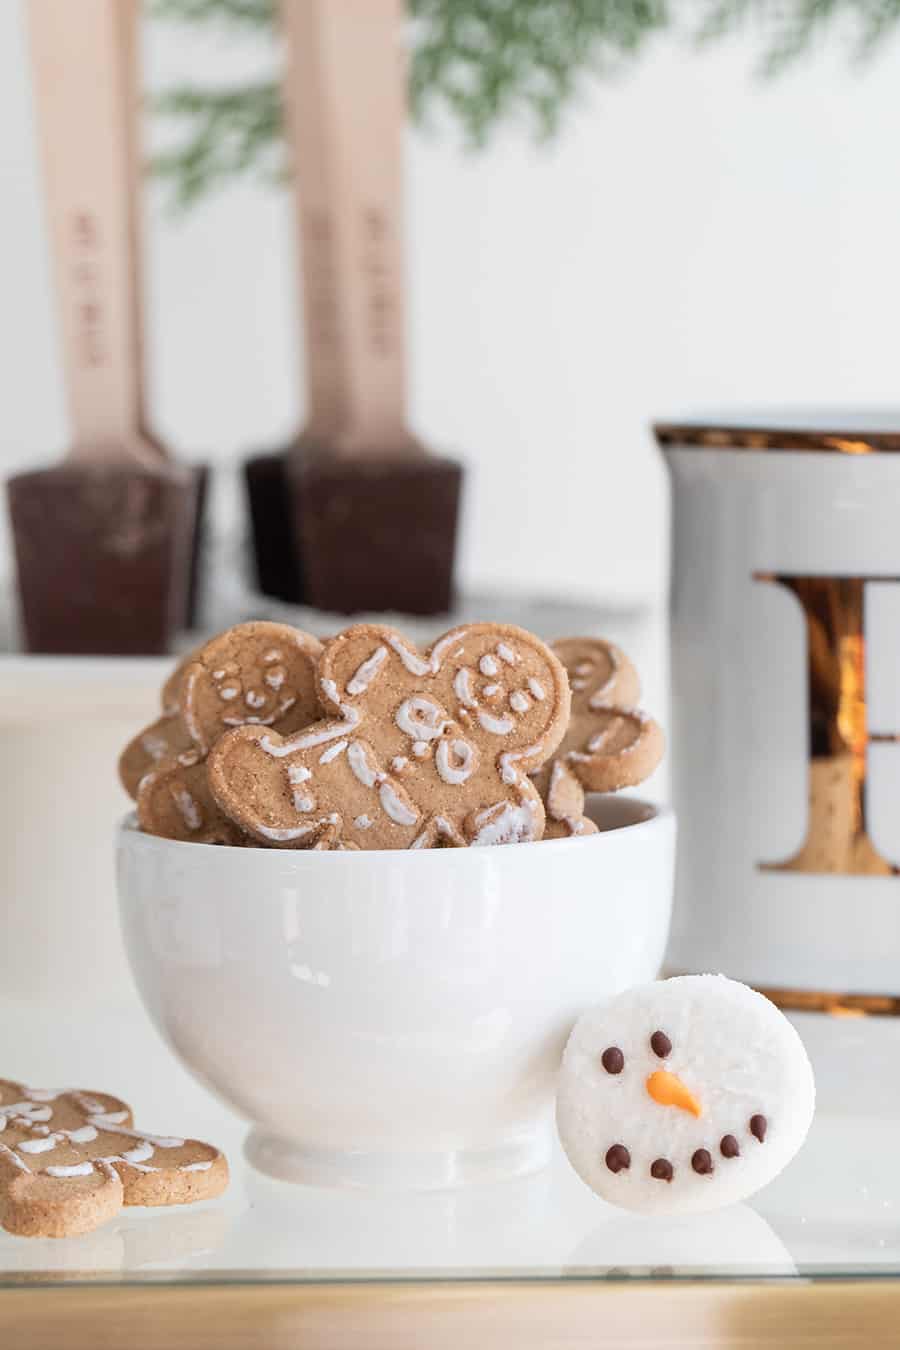 Gingerbread cookies in a small white bowl.